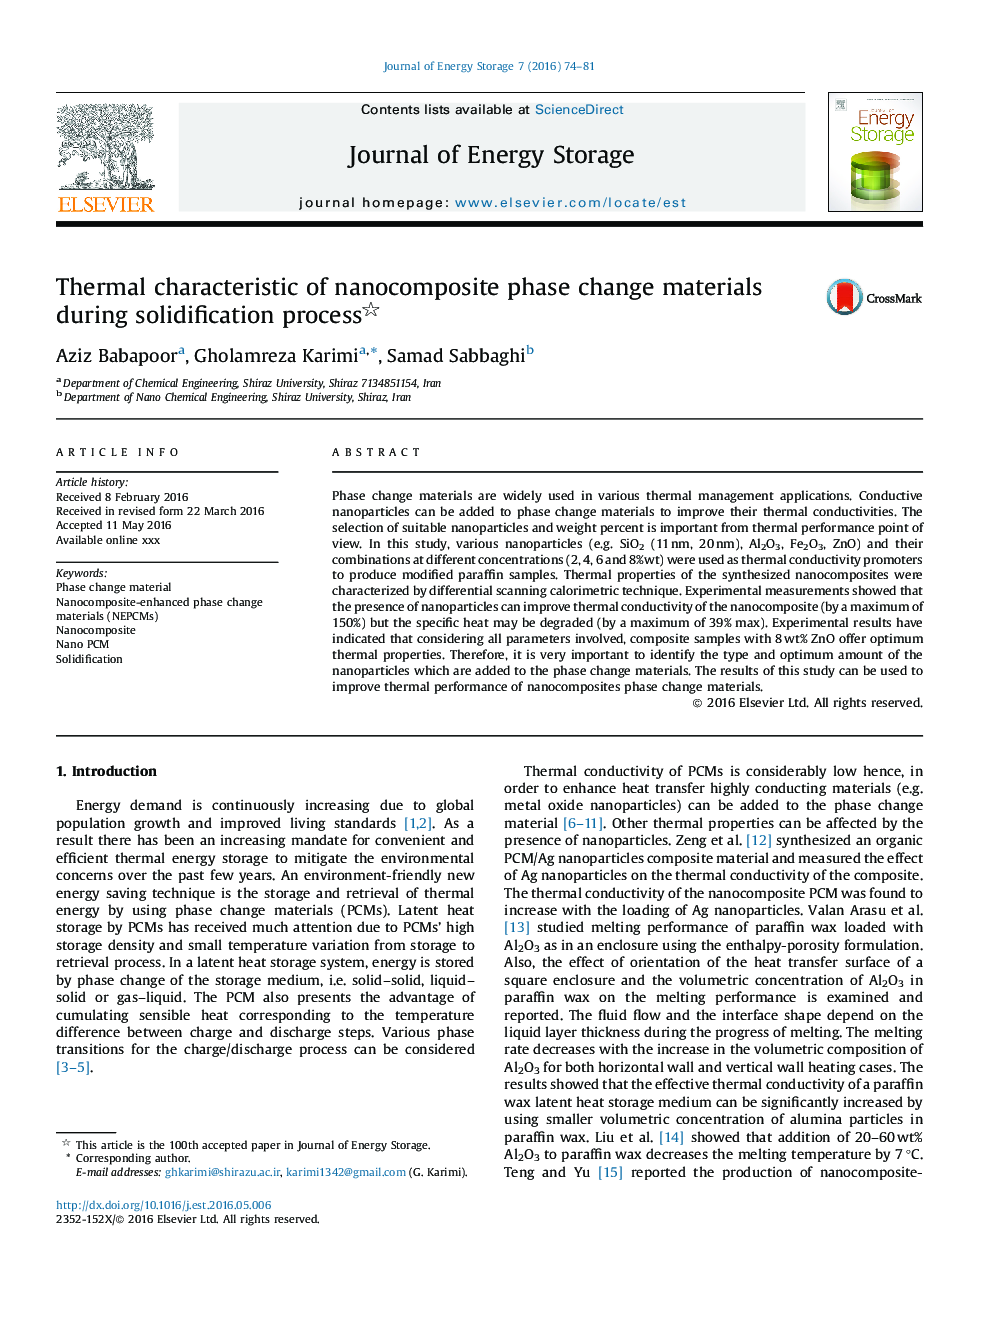 Thermal characteristic of nanocomposite phase change materials during solidification process 